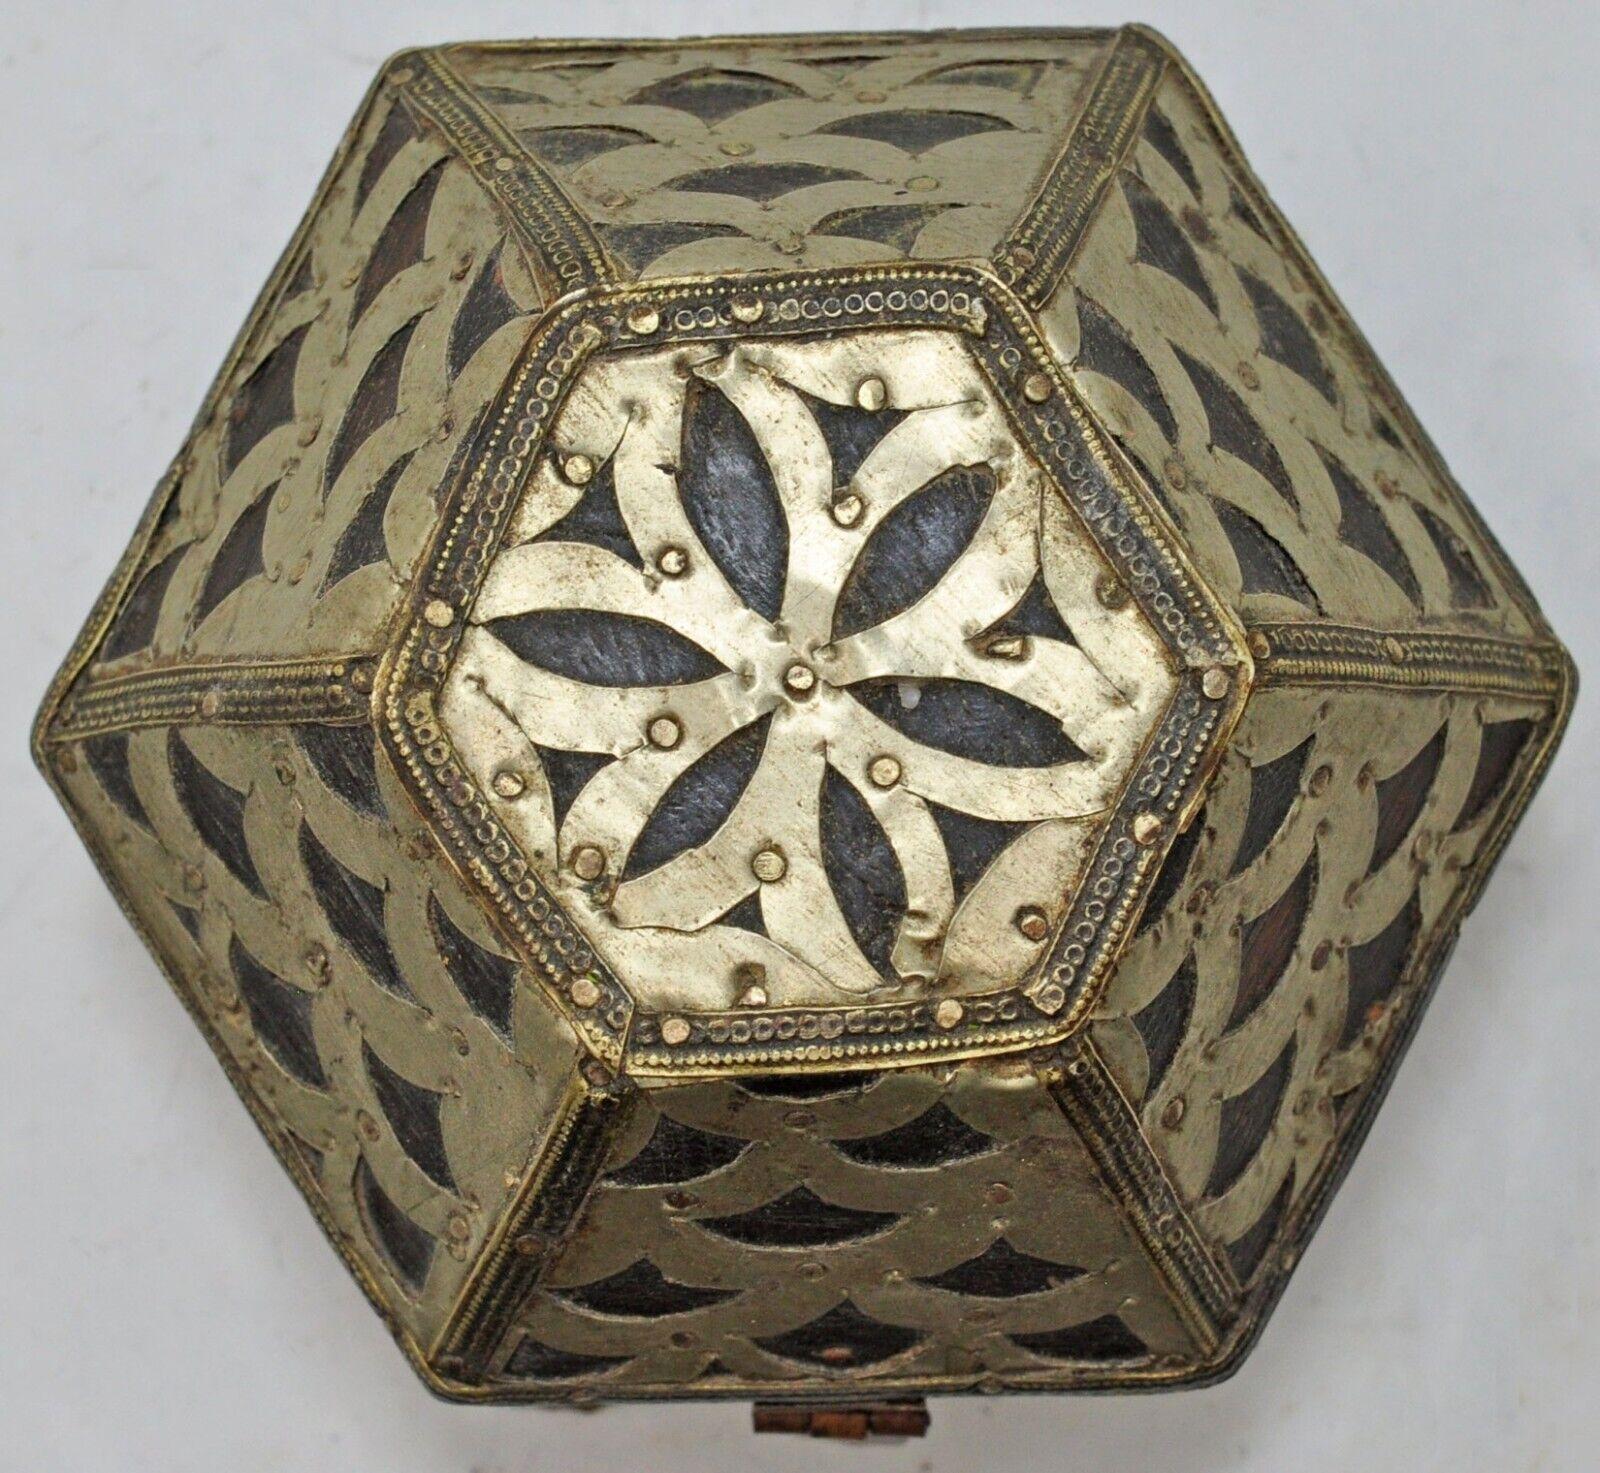 Small and elaborate Hand-Made Vintage Indian Decorative Trinket Box In Fair Condition For Sale In Leesburg, VA